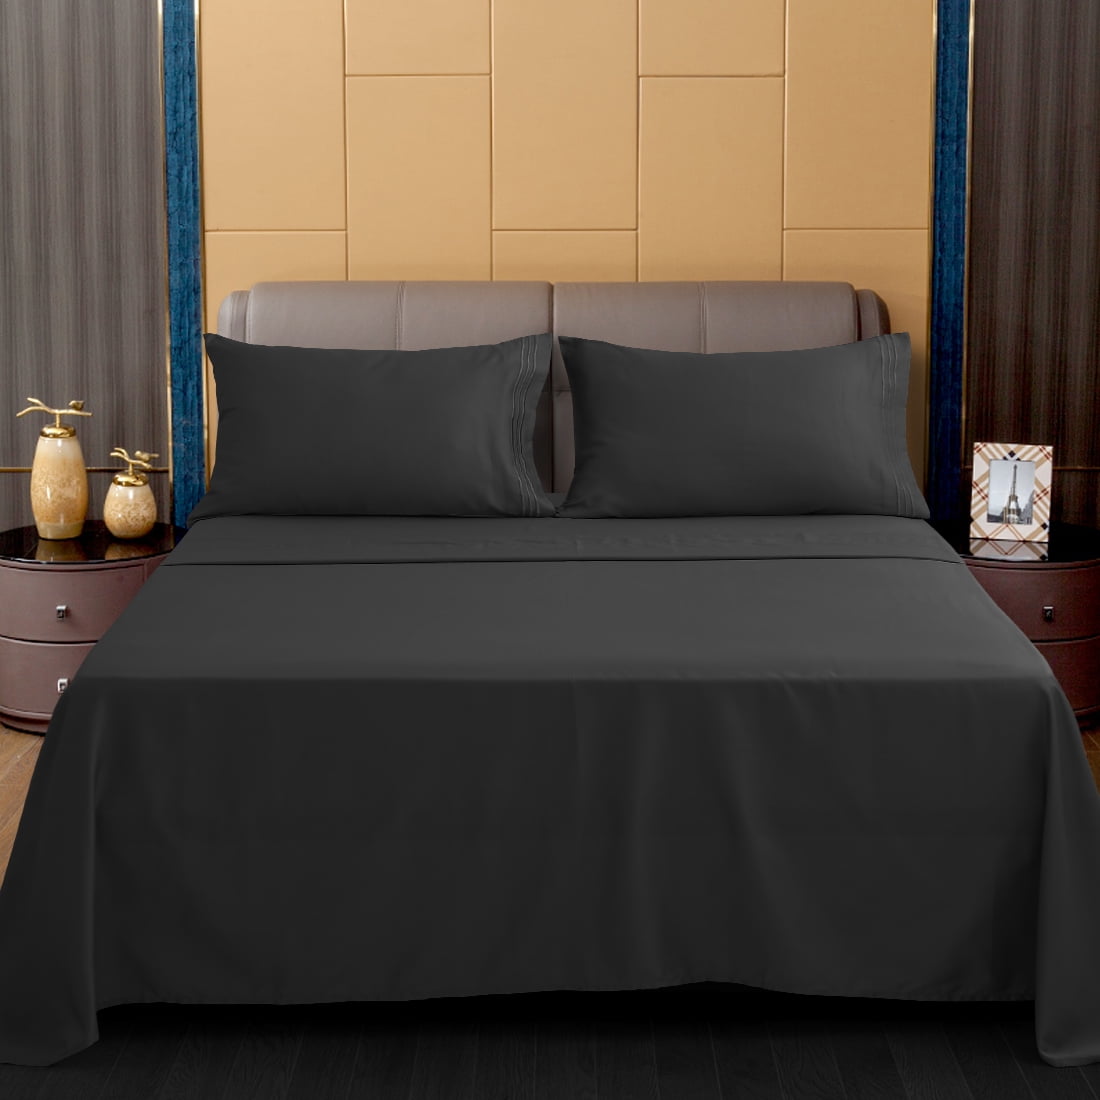 Details about   All New Colors 4 PC Sheet Set 1000tc Egyptian Cotton Extra Deep Pocket All Size 